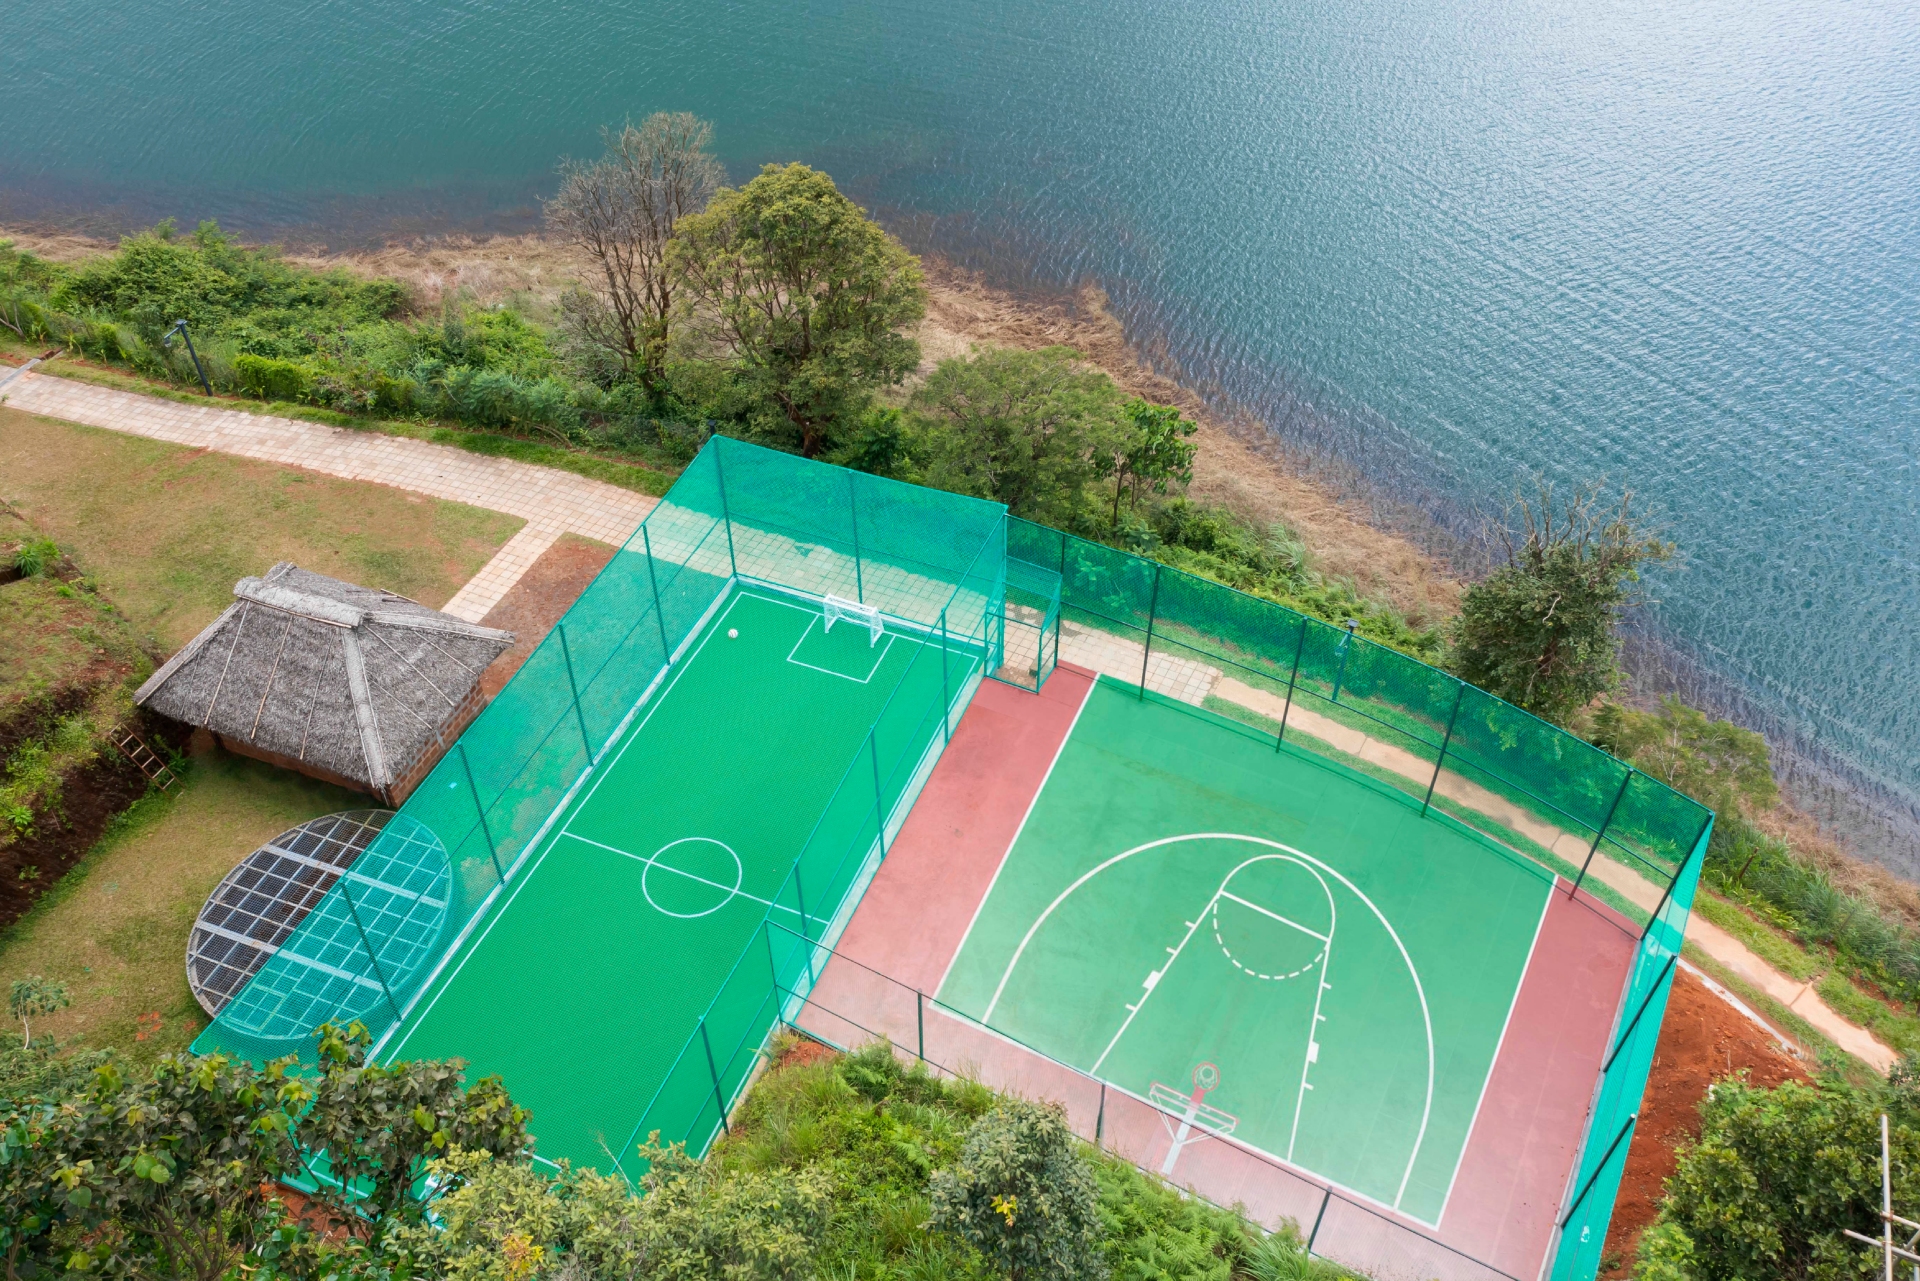 Badminton and basketball courts for at a resort in Wayanad